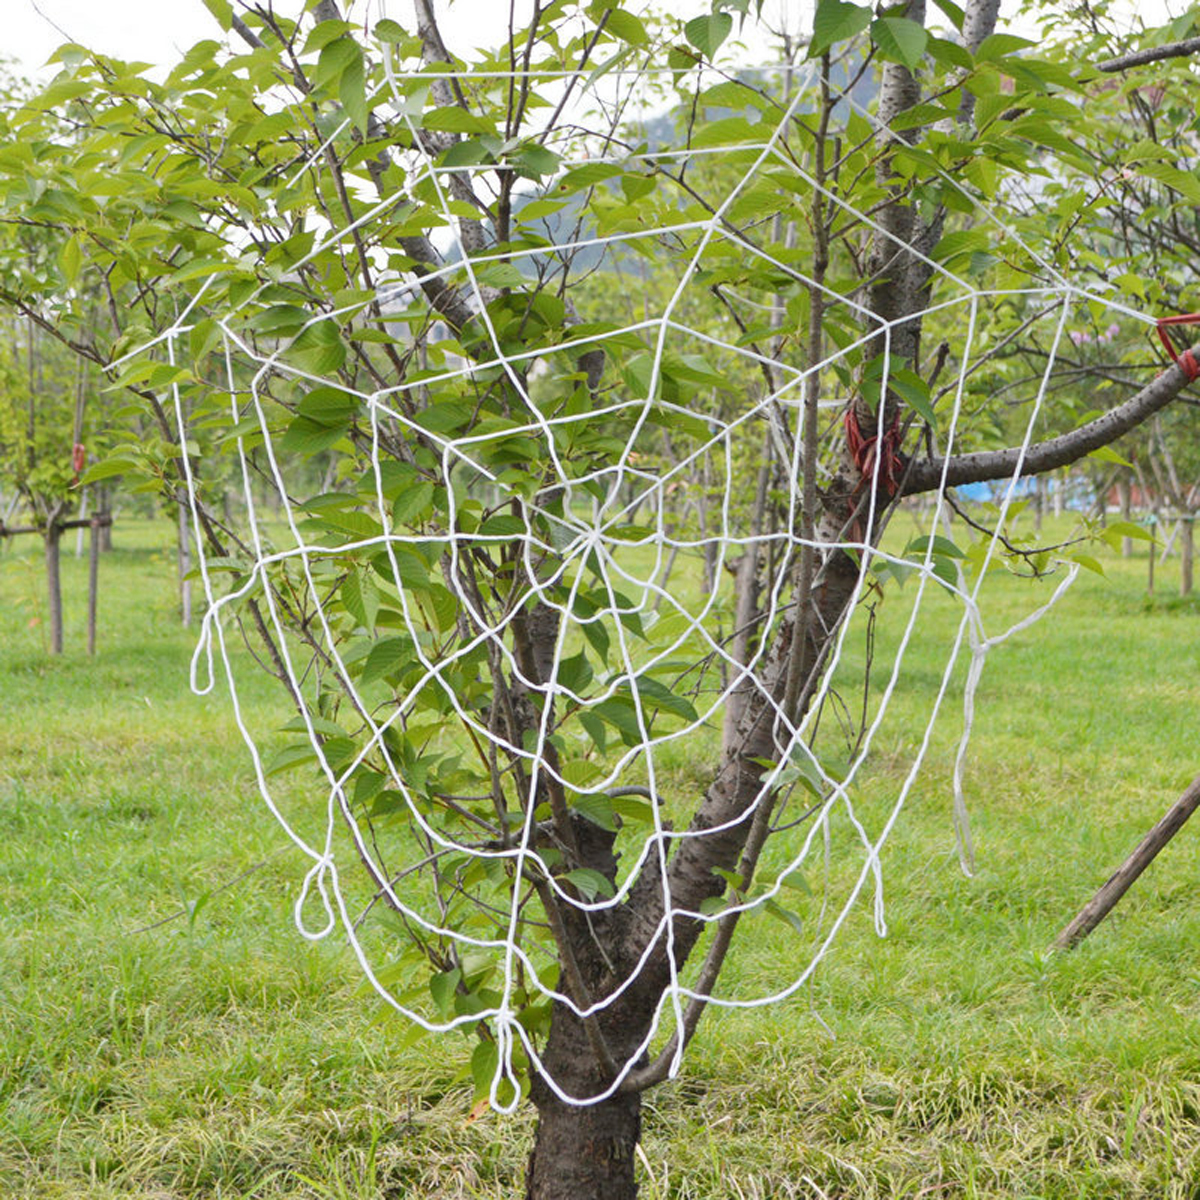 Halloween-LED-Spider-Web-String-Light-Outdoor-Horror-Party-Props-Lamp-Cobweb-Spooky-Decor-1754369-6